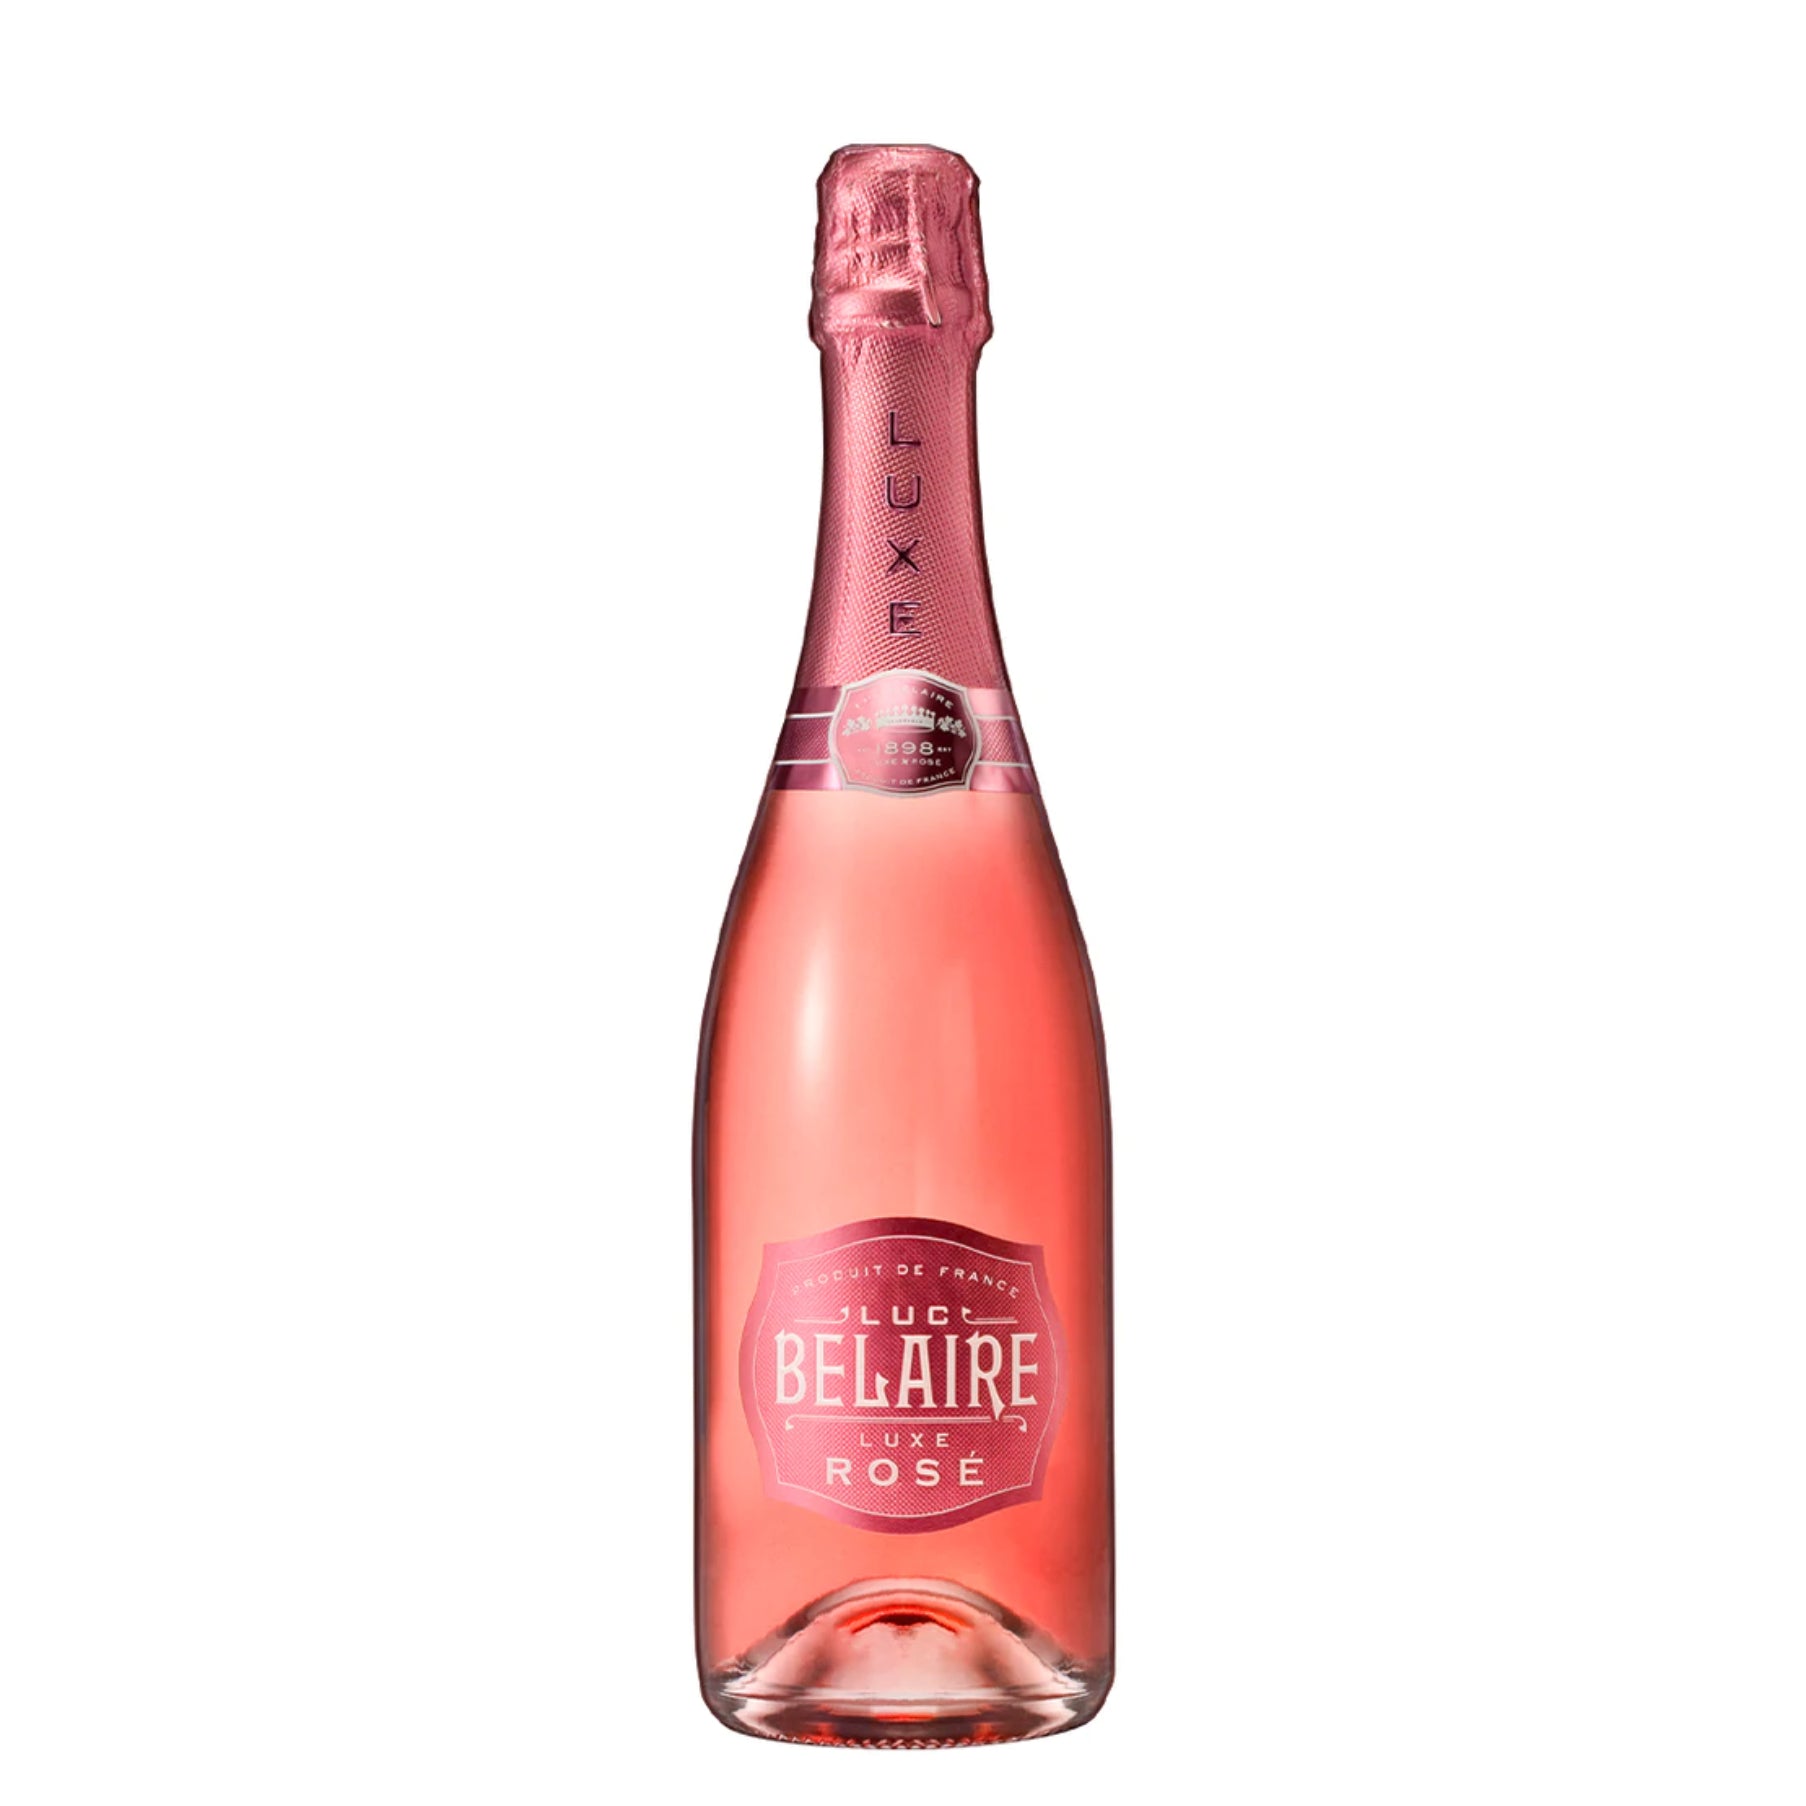 Luc Belaire Luxe Rose Champagne 750ml, Liquor Delivery